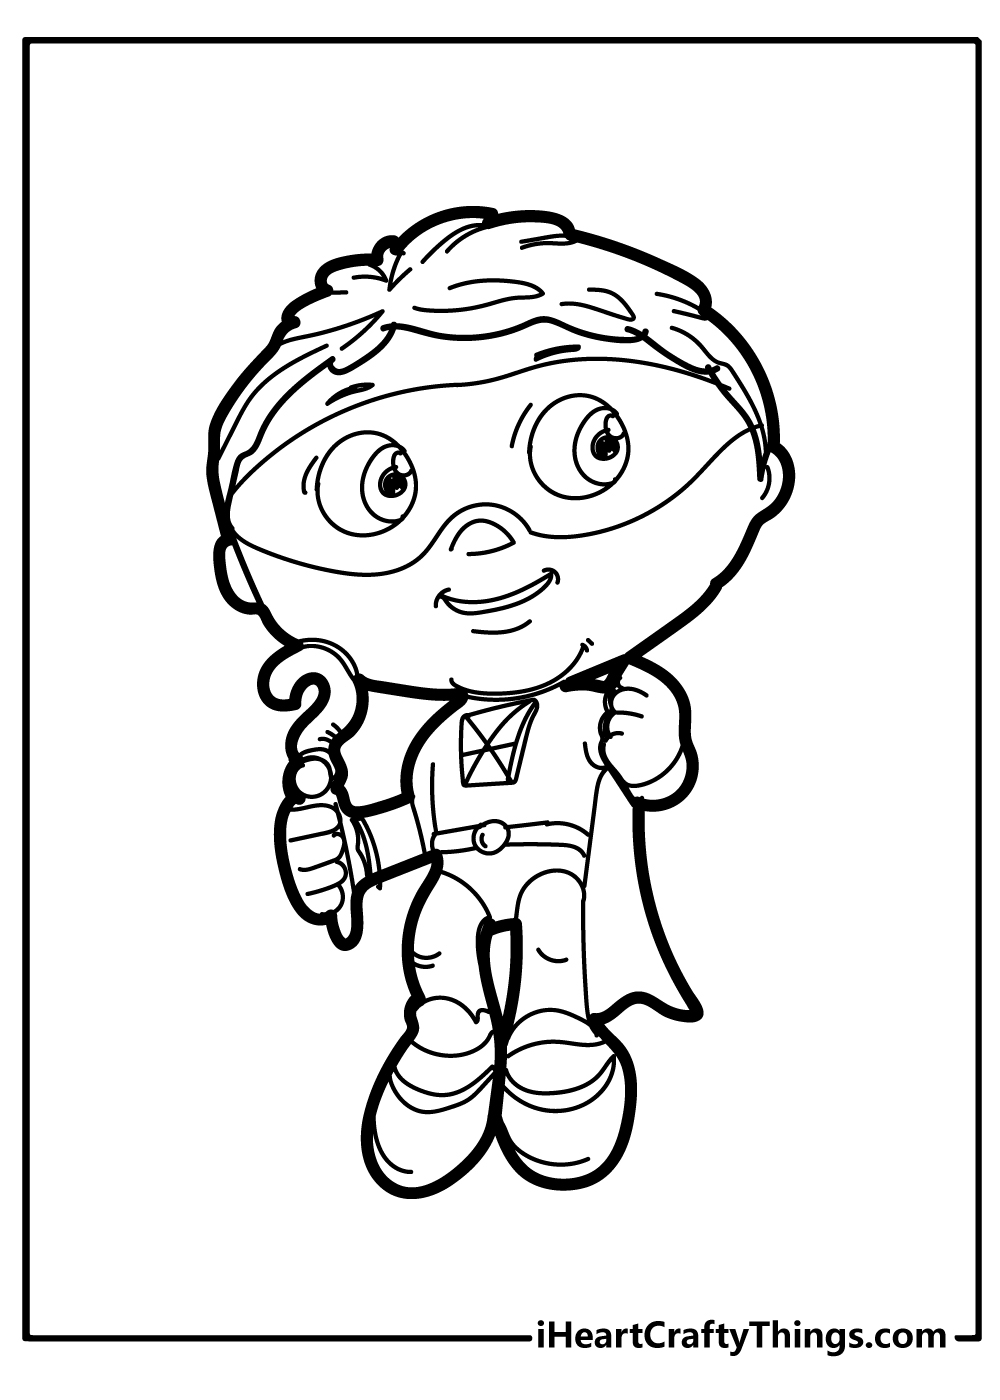 Super Coloring Pages for kids free download